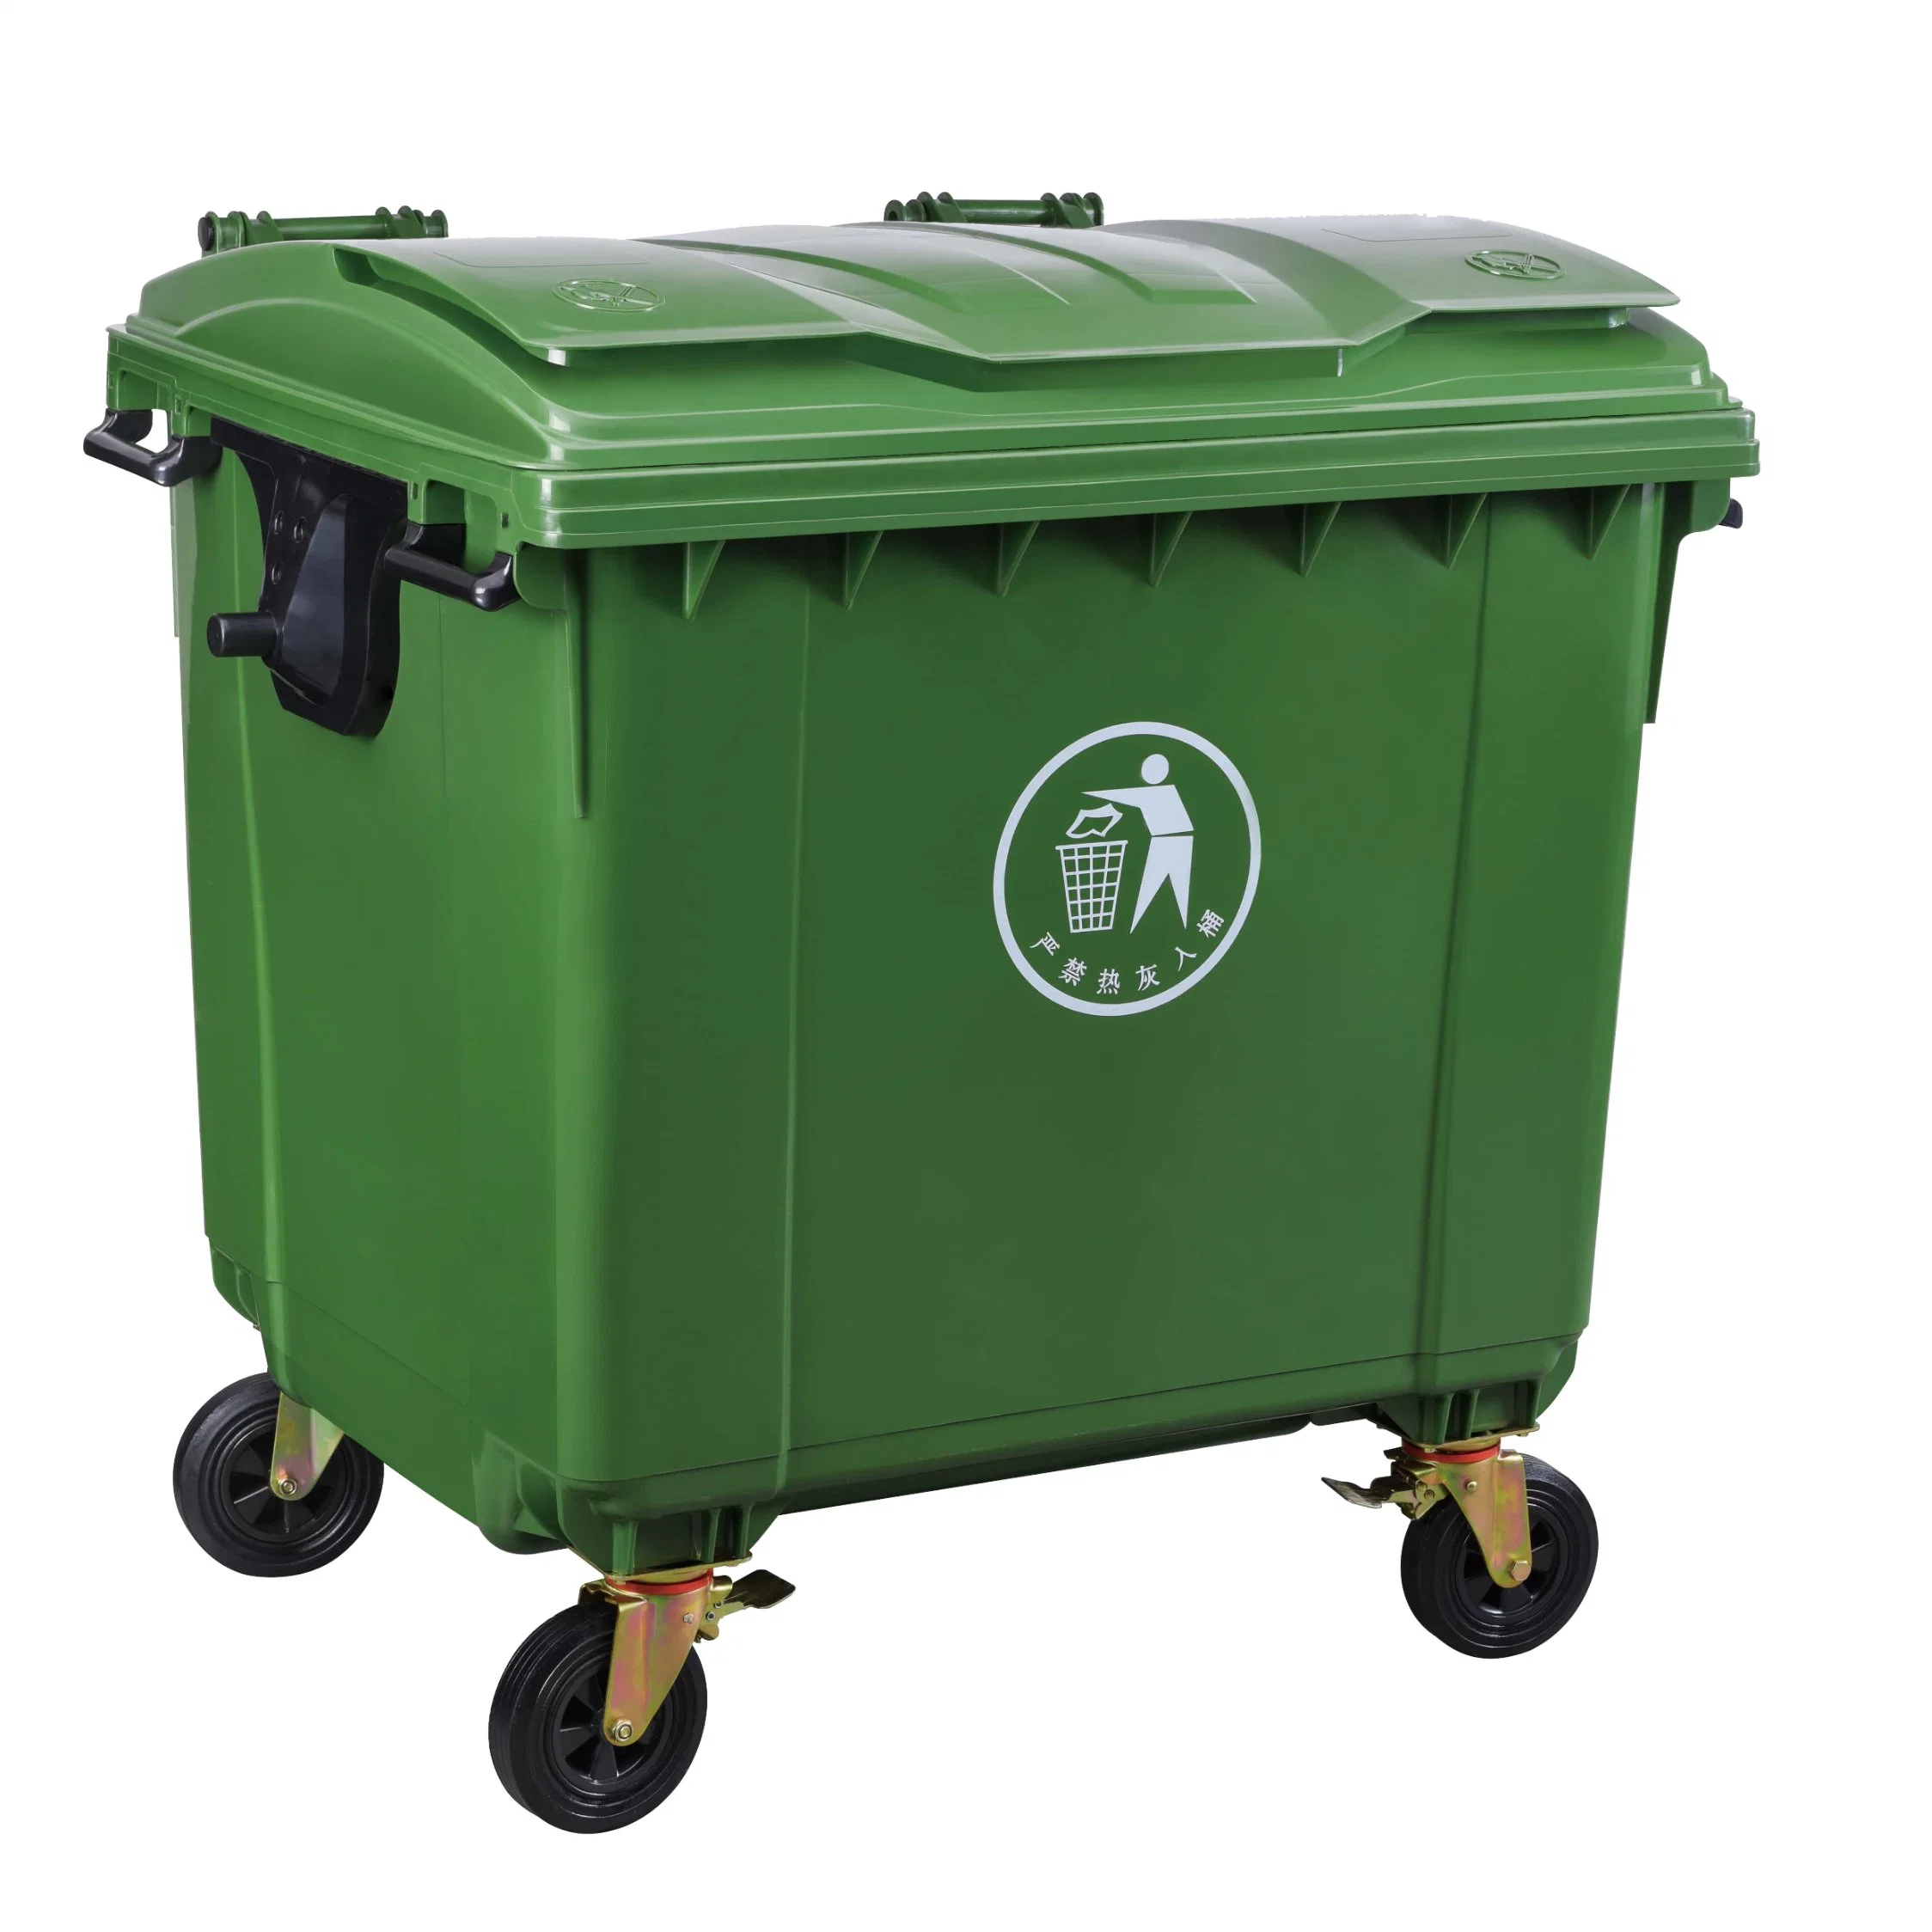 660L/1100L Large Outdoor Street Kitchen Industrial Recycle Rubbish Trash Can Garbage Waste Bin Pedal Plastic Dustbin for Manufacturer Prices